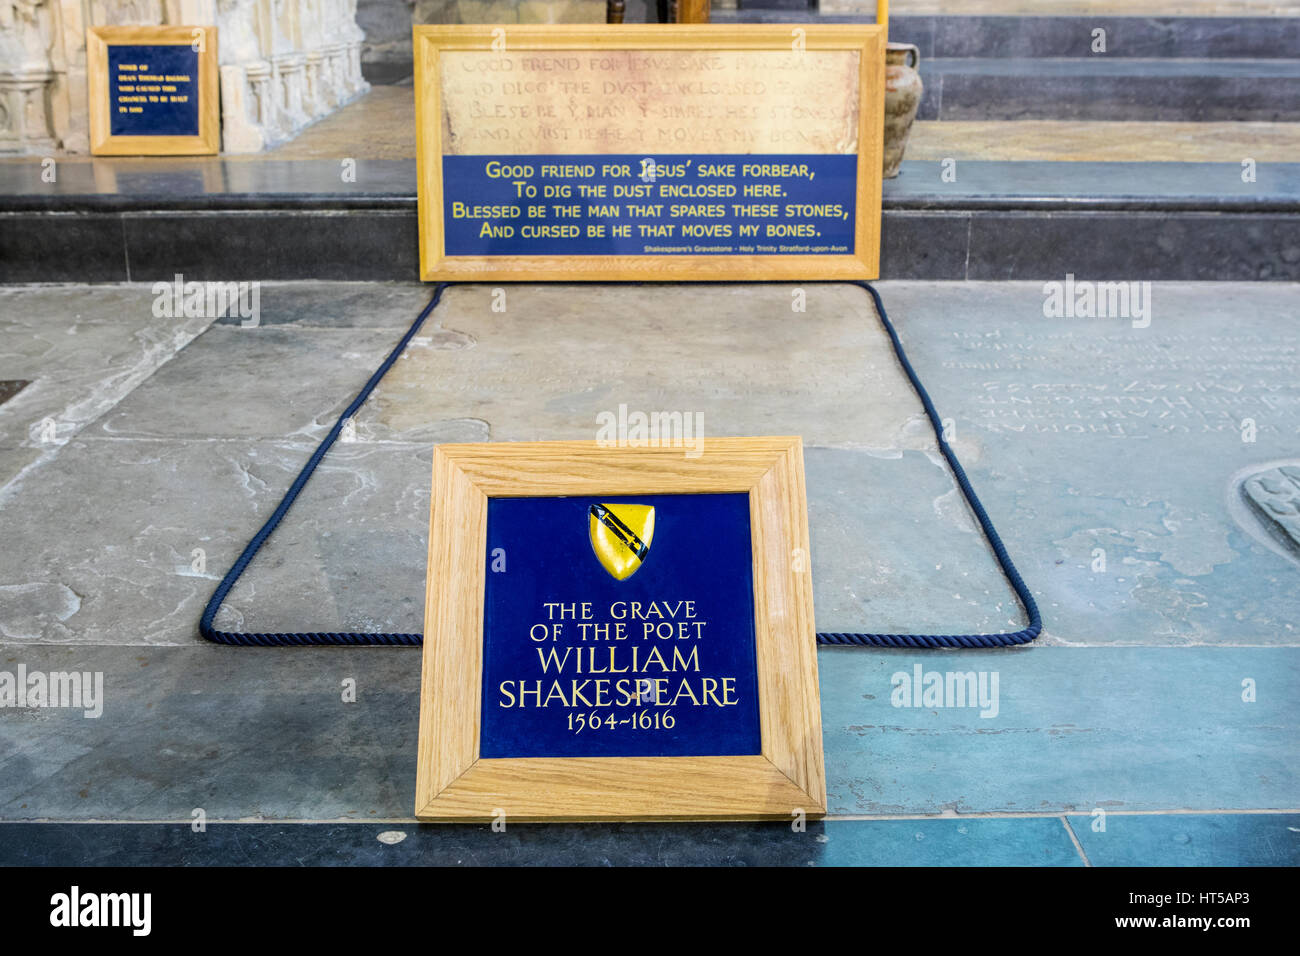 STRATFORD-UPON-AVON, UK - MARCH 1ST 2017: The grave of famous English playwright and poet William Shakespeare, located in the Church of the Holy Trini Stock Photo